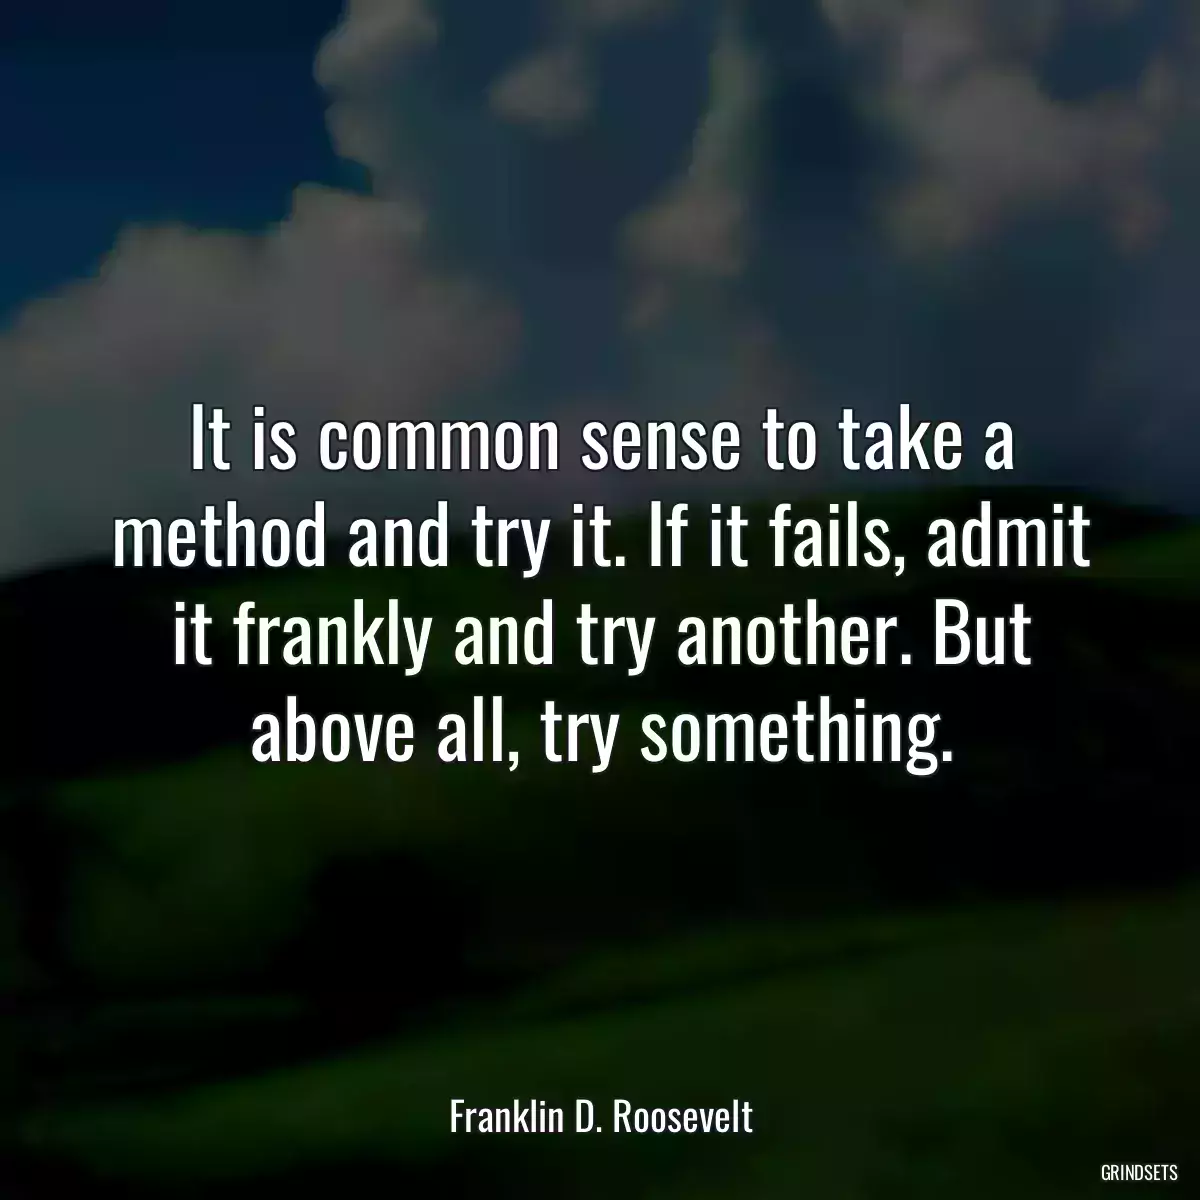 It is common sense to take a method and try it. If it fails, admit it frankly and try another. But above all, try something.